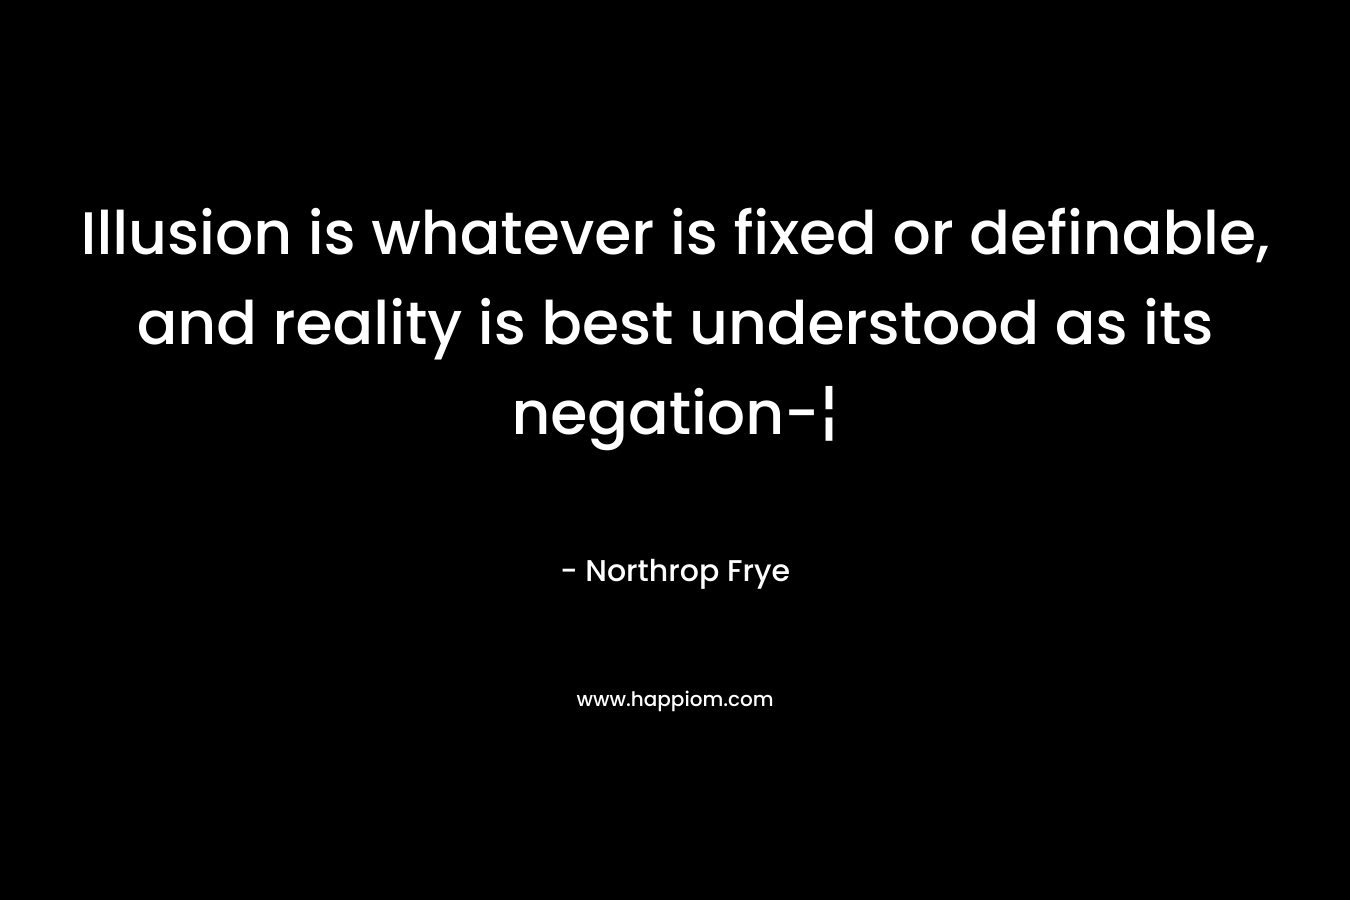 Illusion is whatever is fixed or definable, and reality is best understood as its negation-¦